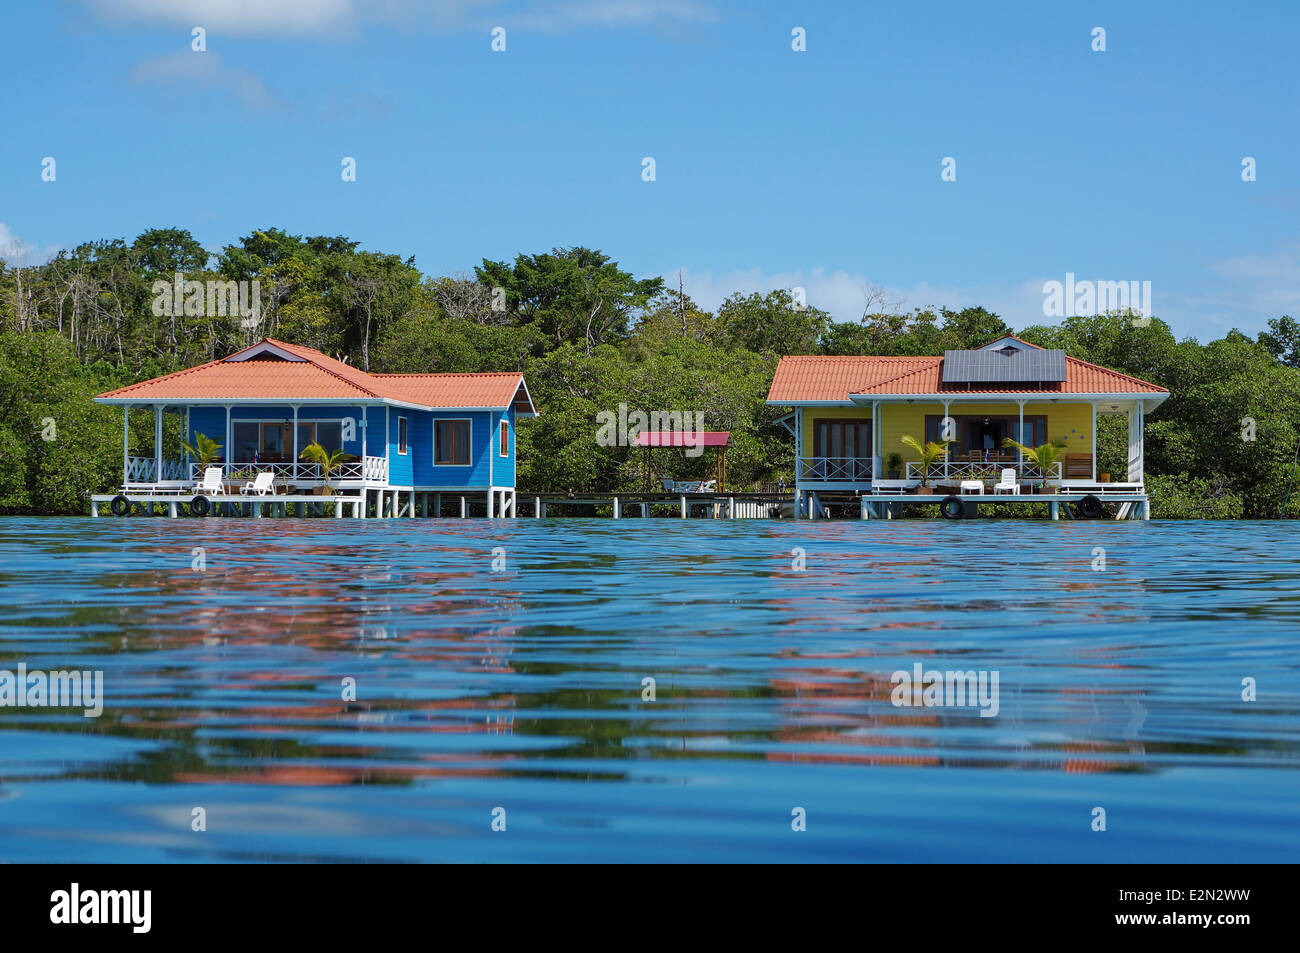 Off grid over water bungalows, one with solar panels, Caribbean sea, Panama Stock Photo